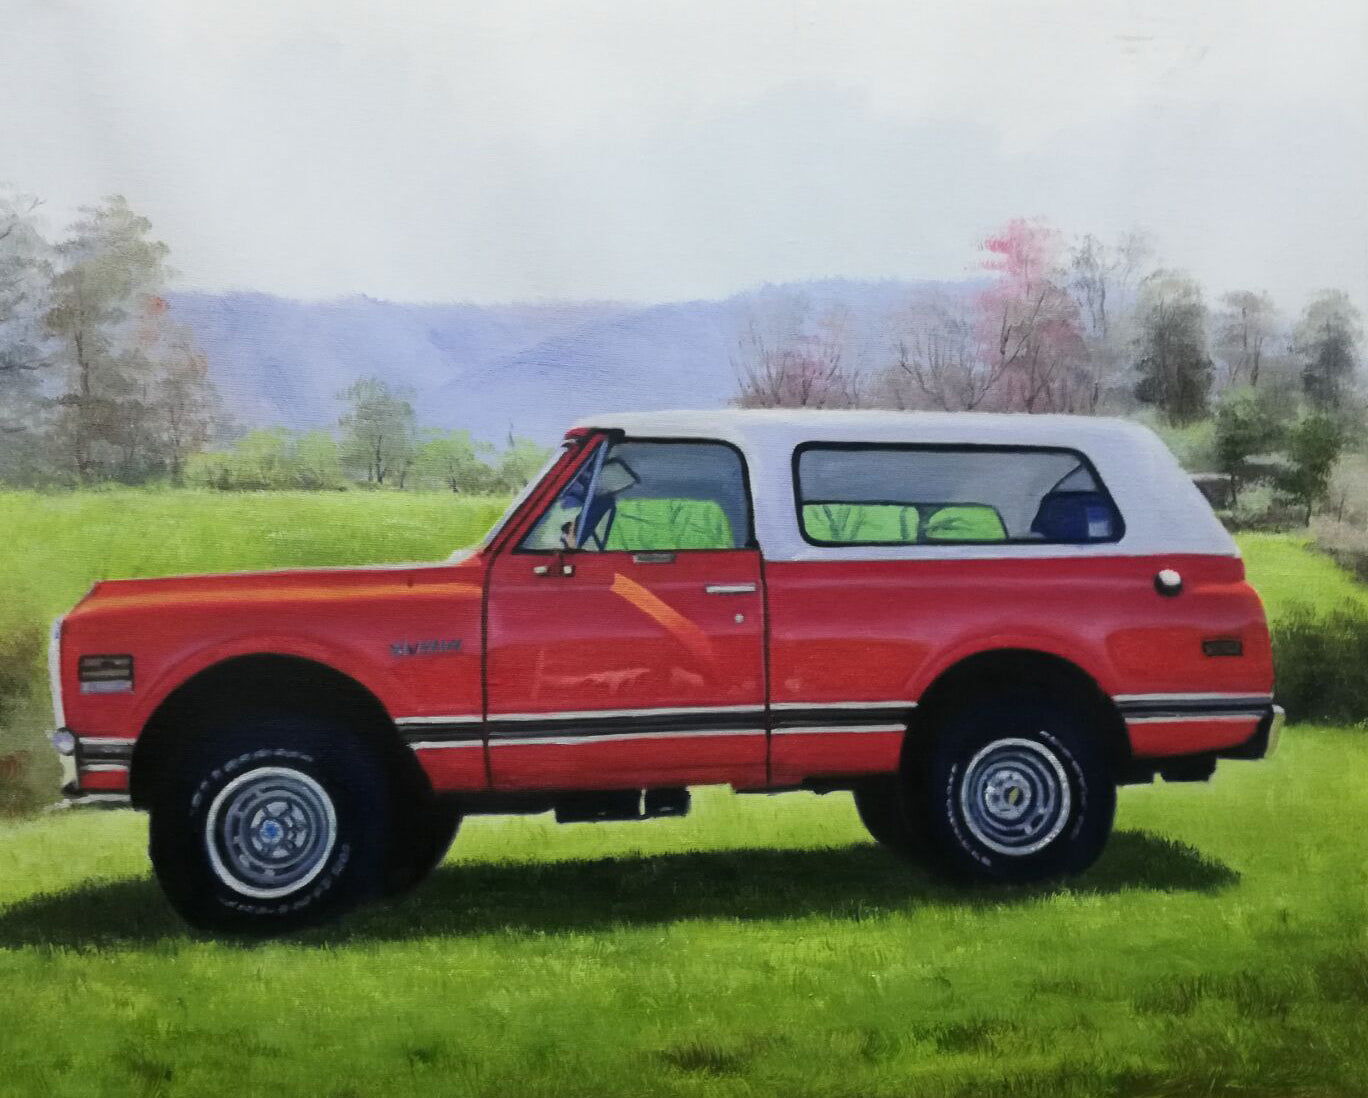 Commission a custom painting of your car